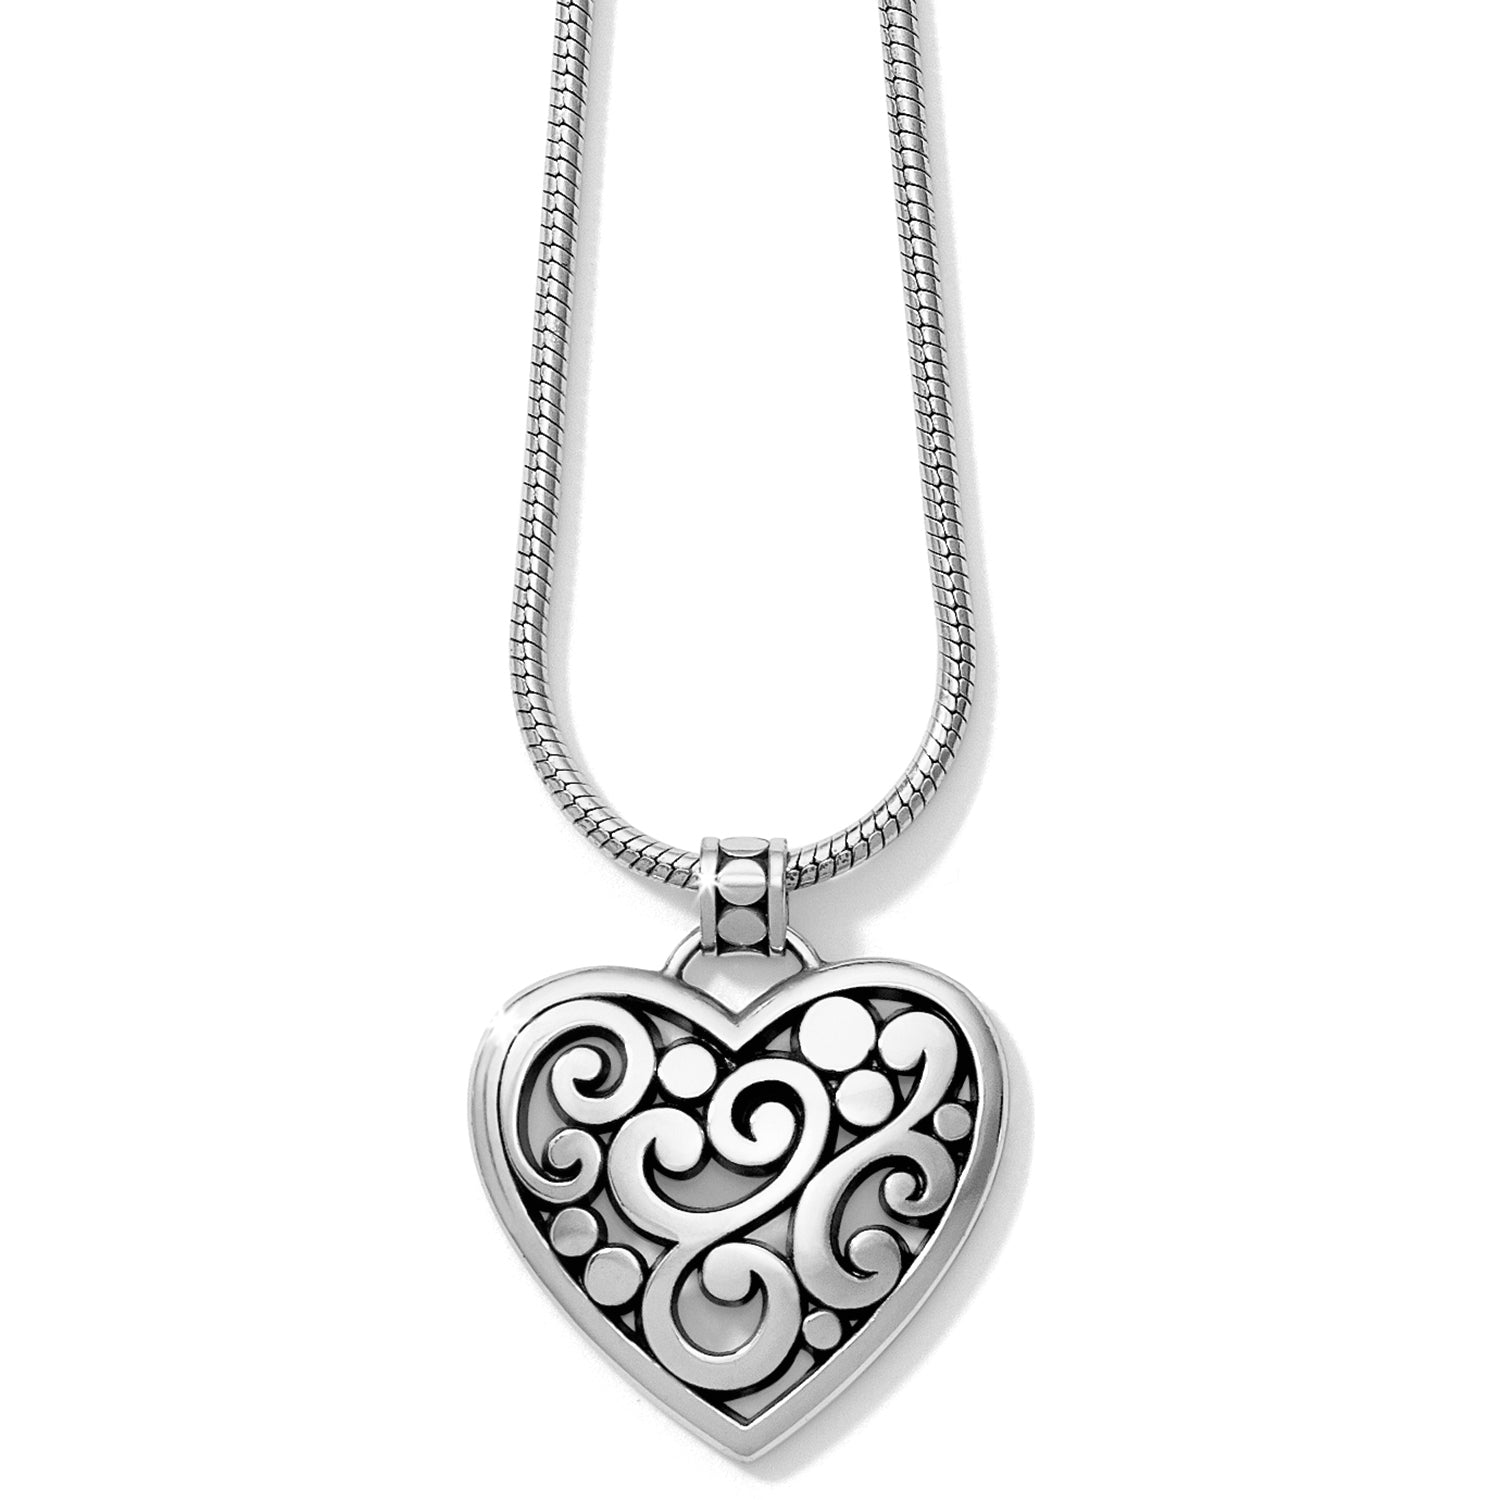 Contempo Heart Necklace - Jewelry - SierraLily